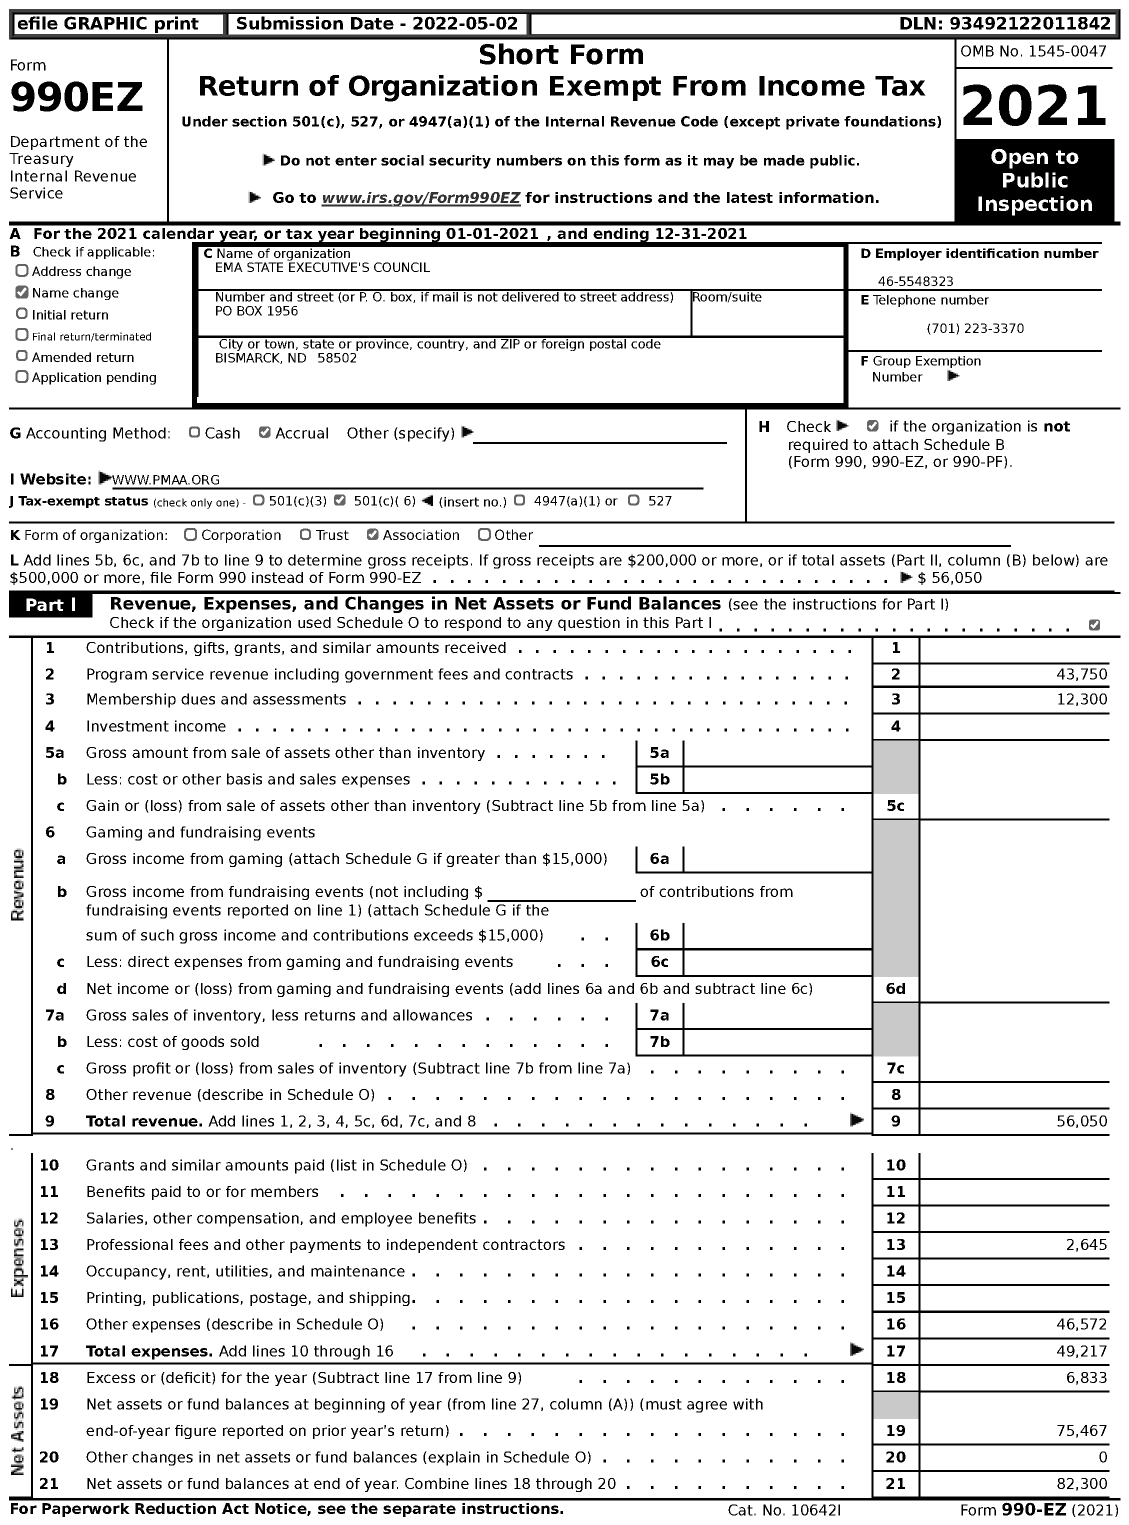 Image of first page of 2021 Form 990EZ for Ema State Executive's Council